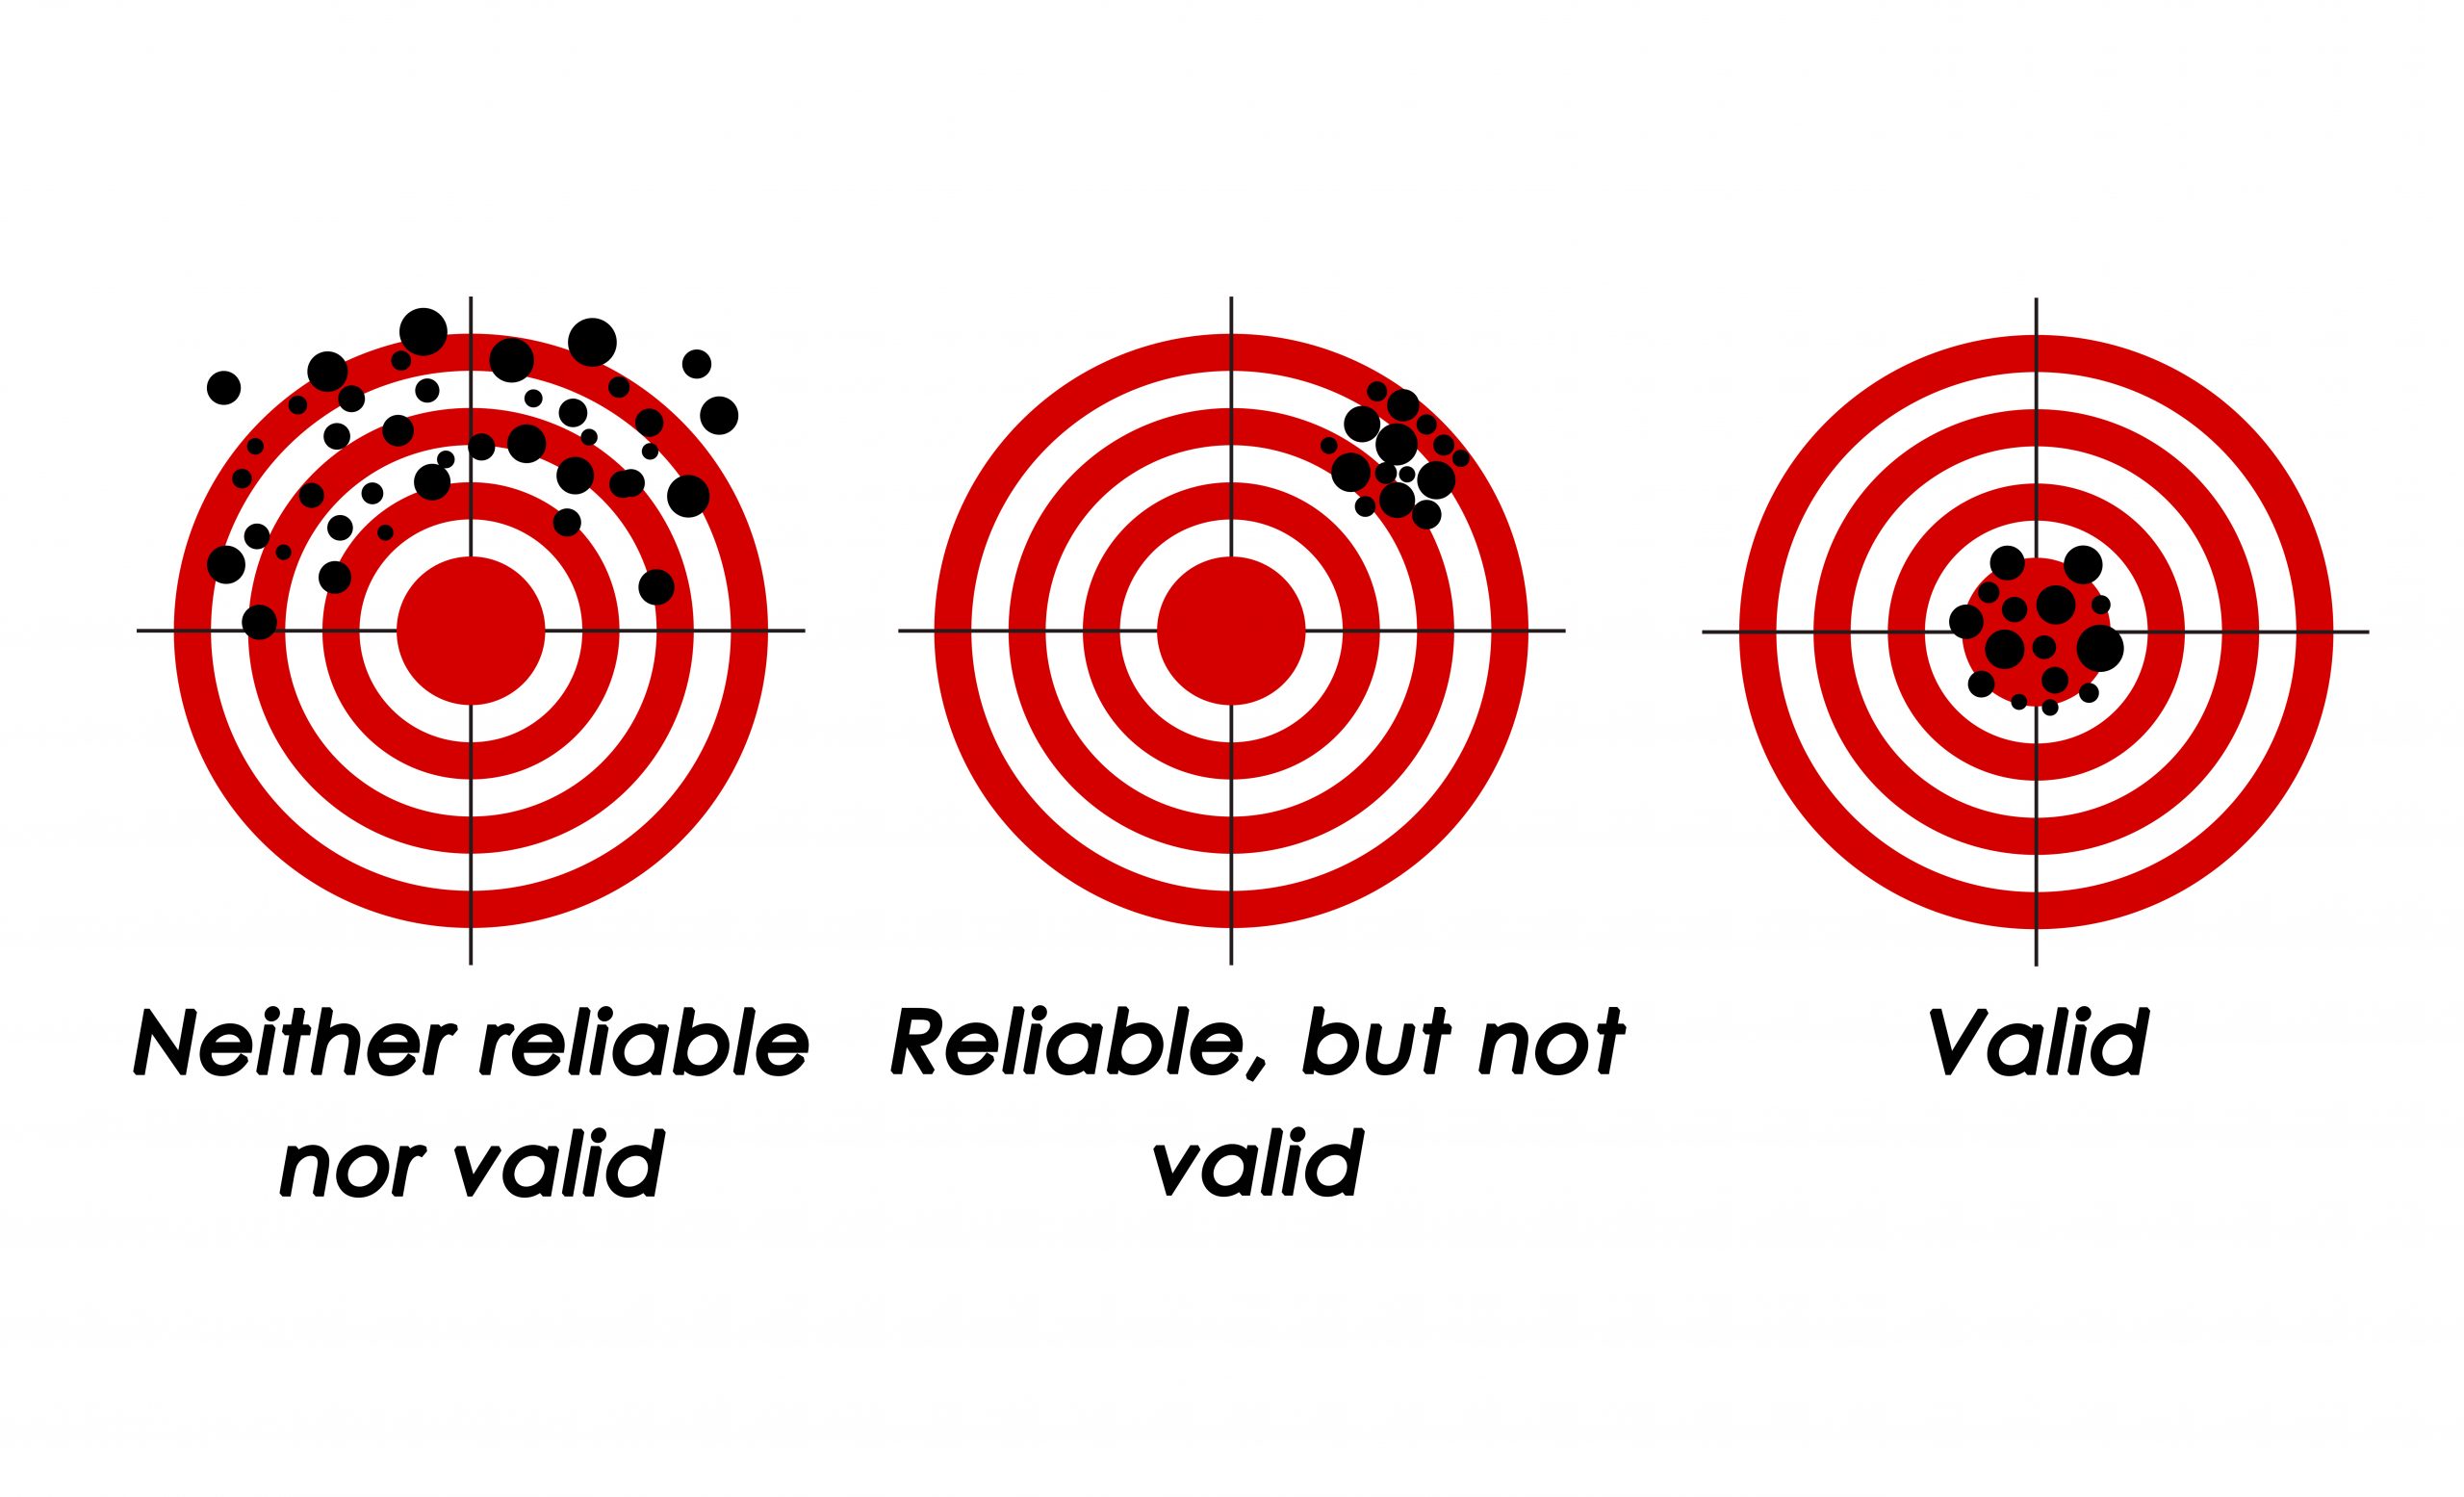 This figure uses images of three targets with bullet holes to demonstrate reliability and validity